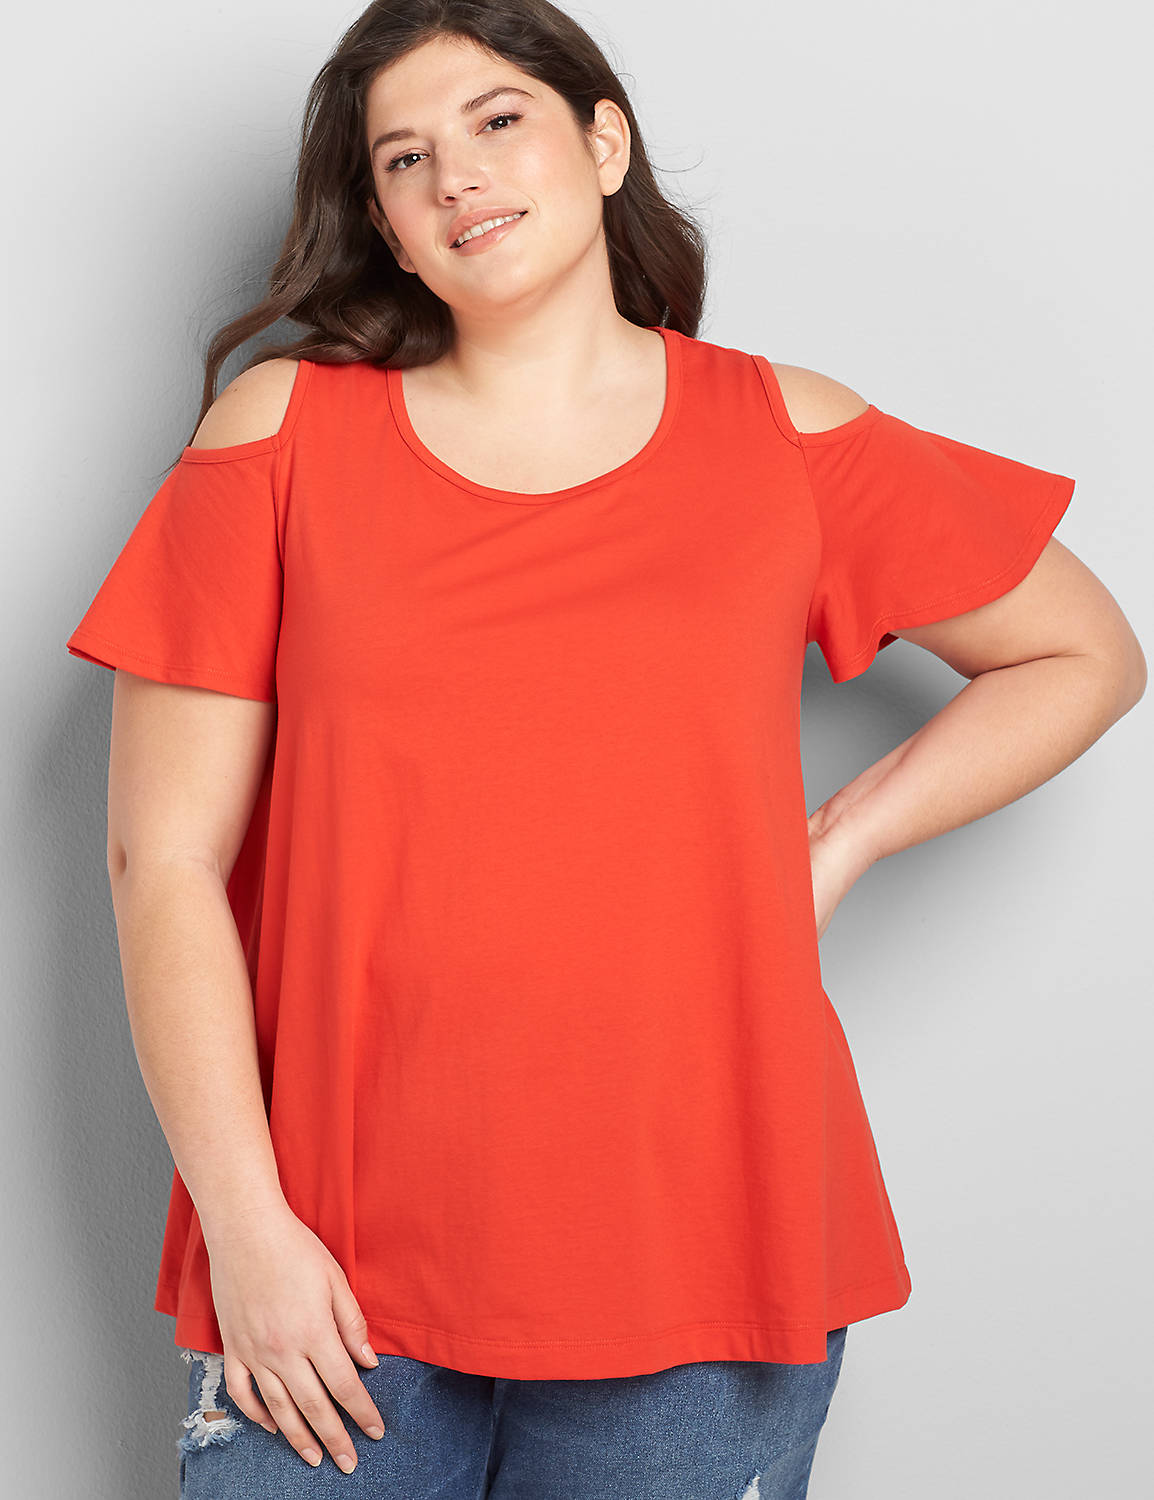 Cold-Shoulder Swing Tee Product Image 1